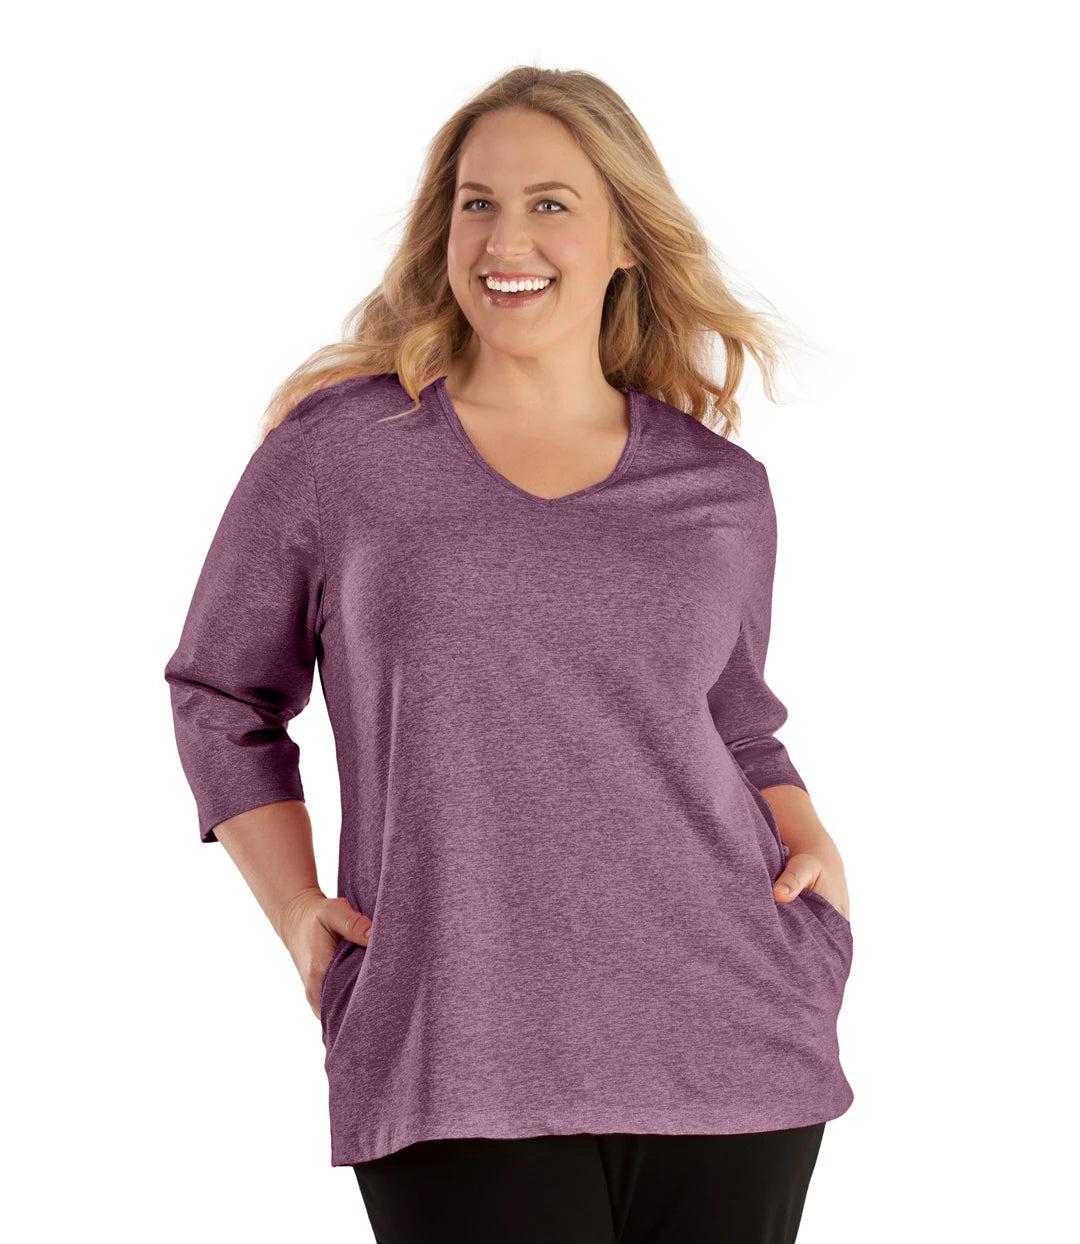 Plus size woman, facing front, wearing JunoActive plus size SoftWik V-Neck ¾ Sleeve Top with Pockets in the color Heather Merlot. She is wearing JunoActive Plus Size Leggings in the color Black.